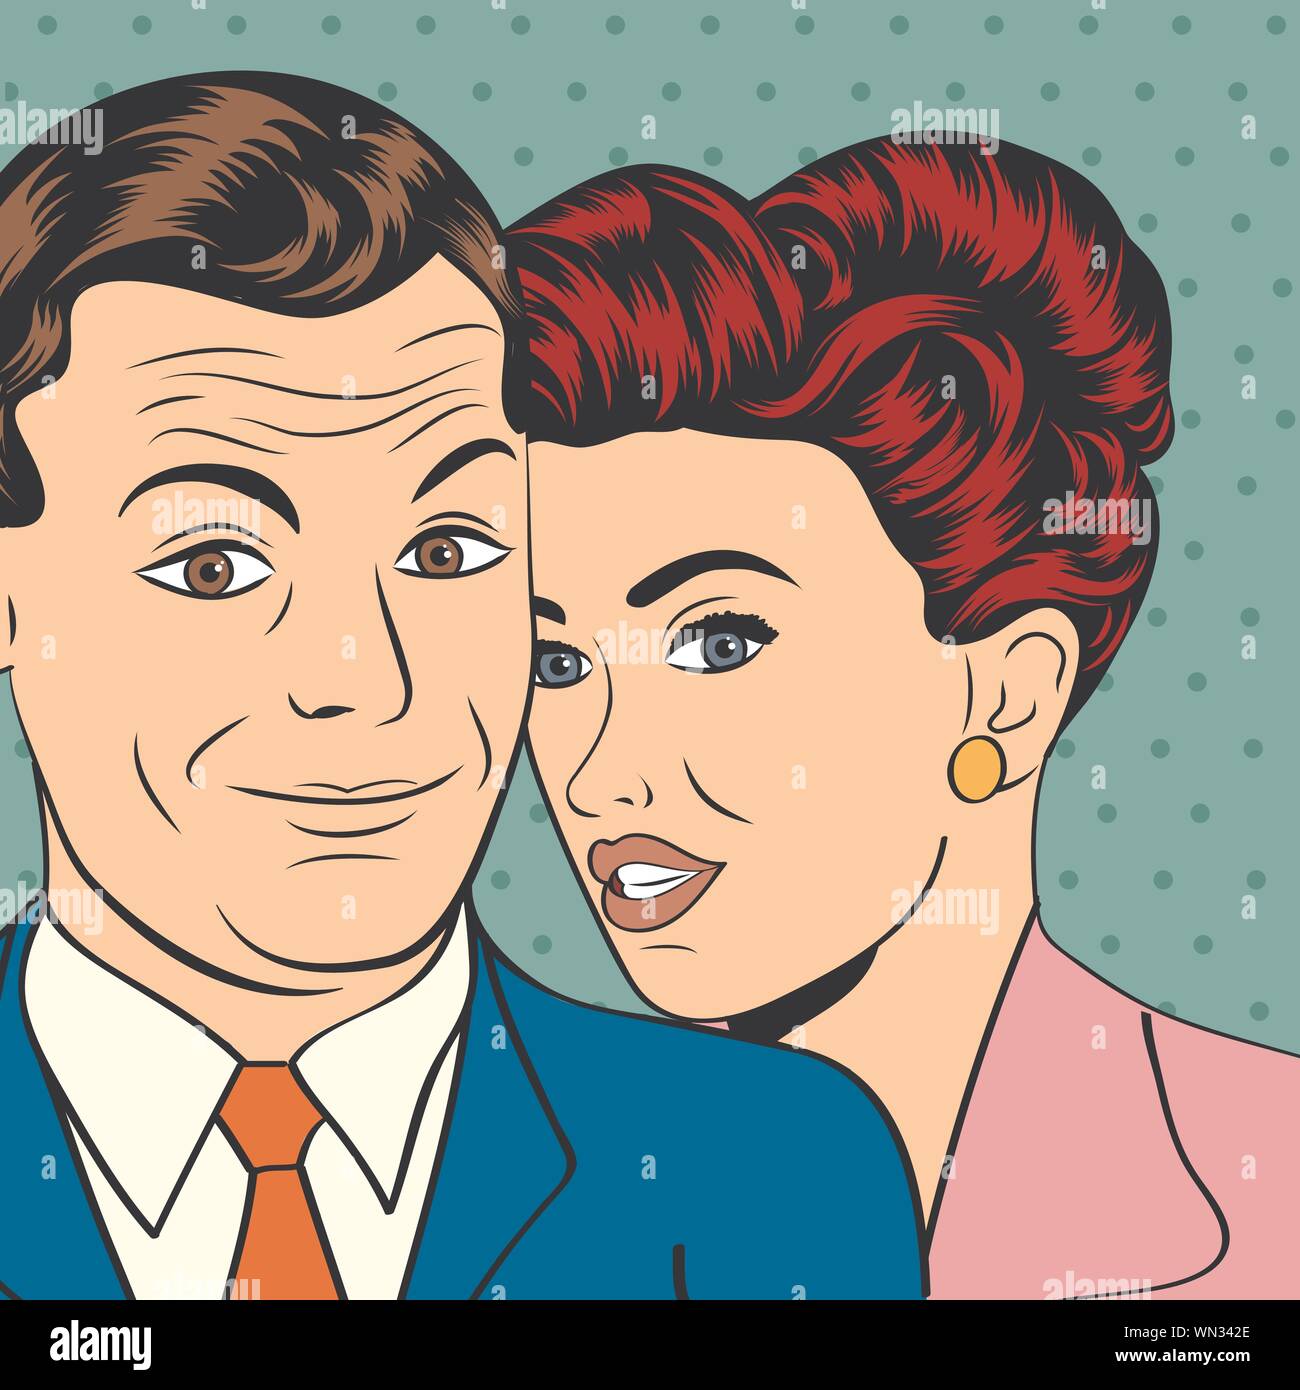 Man And Woman Love Couple In Pop Art Comic Style Stock Vector Image